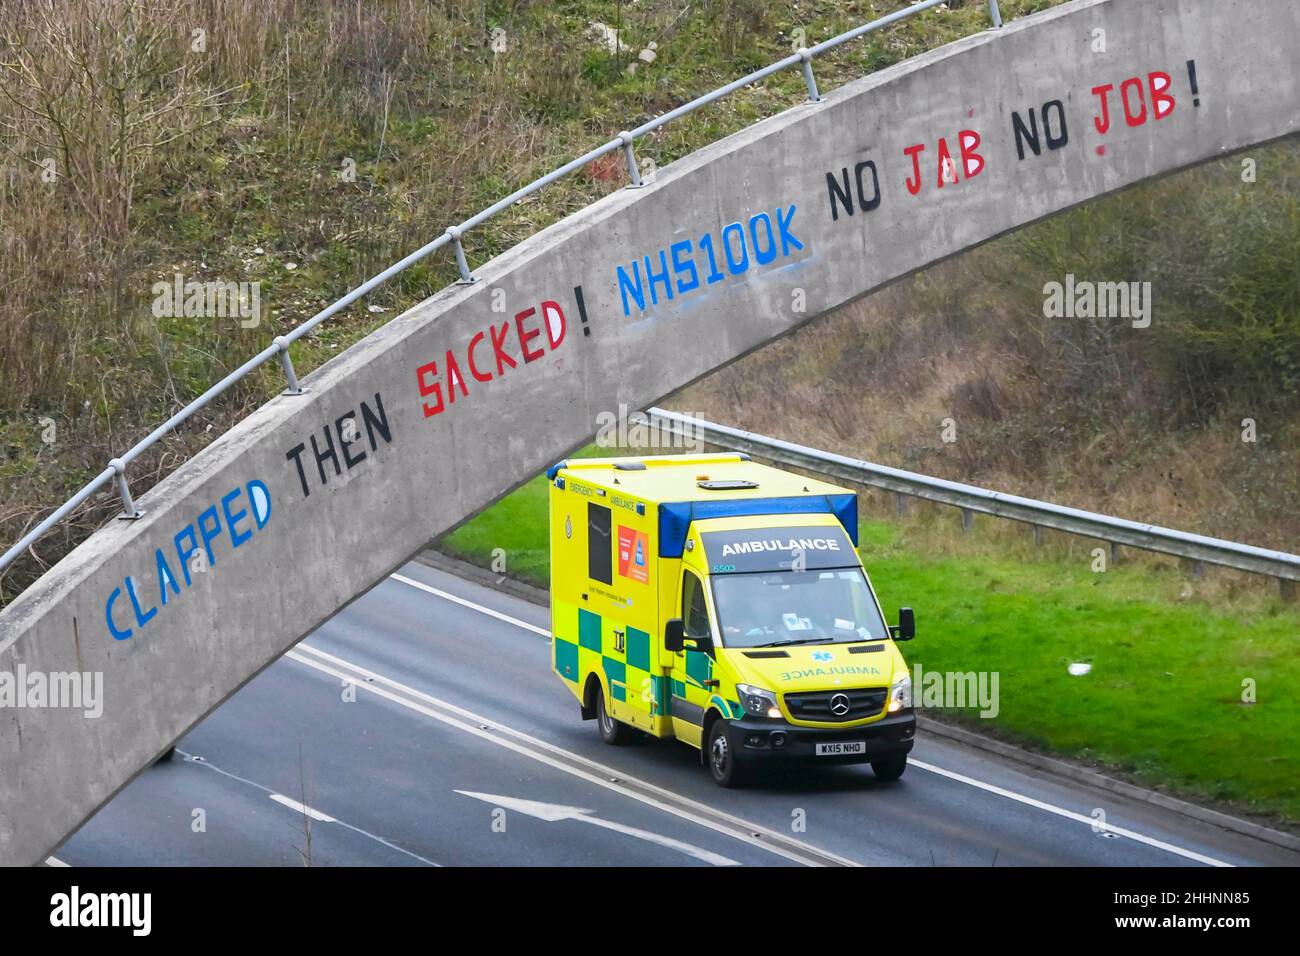 Weymouth, Dorset, UK.  25th January 2022.  An NHS Ambulance passes under a bridge on the A354 at Weymouth in Dorset which has had a graffiti message written on it saying “Clapped Then Sacked! NHS100K No Jabs No Jobs!  The message has appeared as the deadline for the governments mandatory Covid vaccination for NHS staff approaches with the deadline for the first jab on 3rd February and for them to be fully vaccinated by 1st April 2022.  Picture Credit: Graham Hunt/Alamy Live News Stock Photo